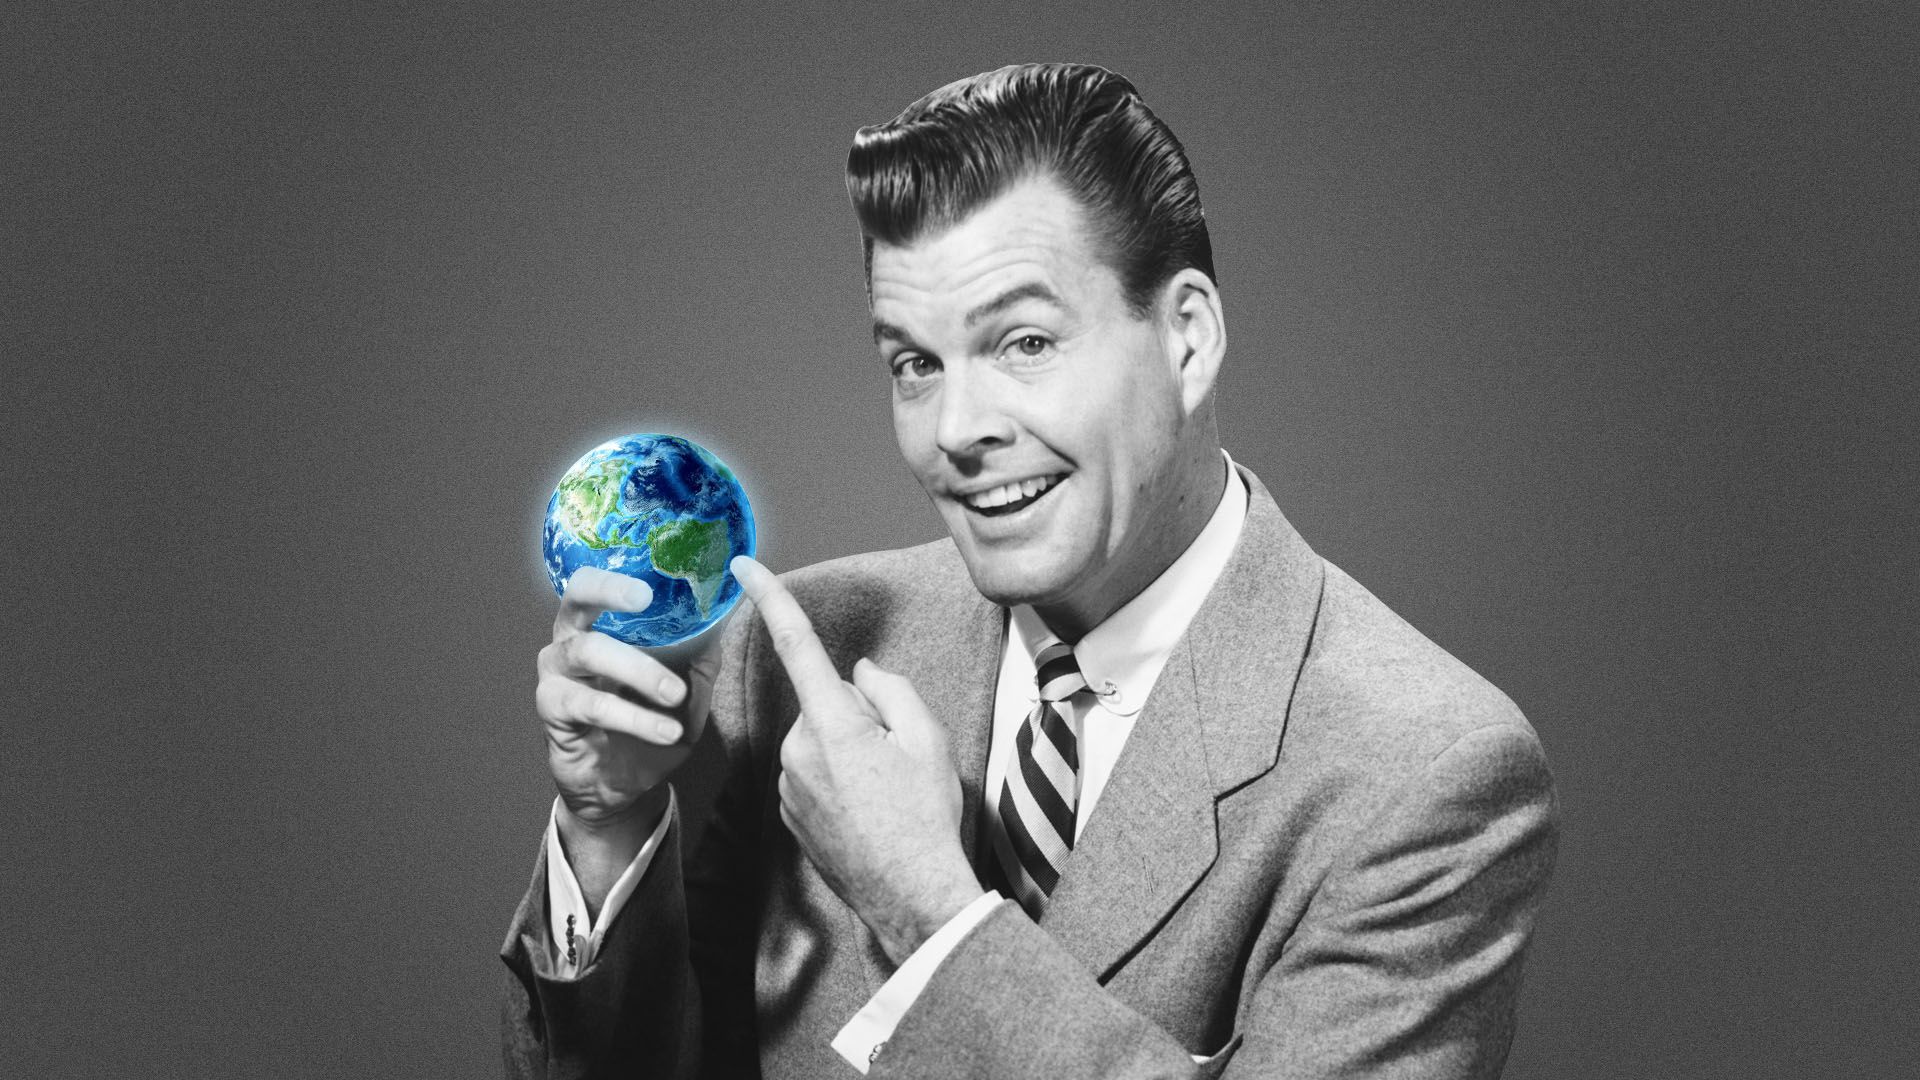 Illustration of vintage advertisement of a man holding up a small glowing earth